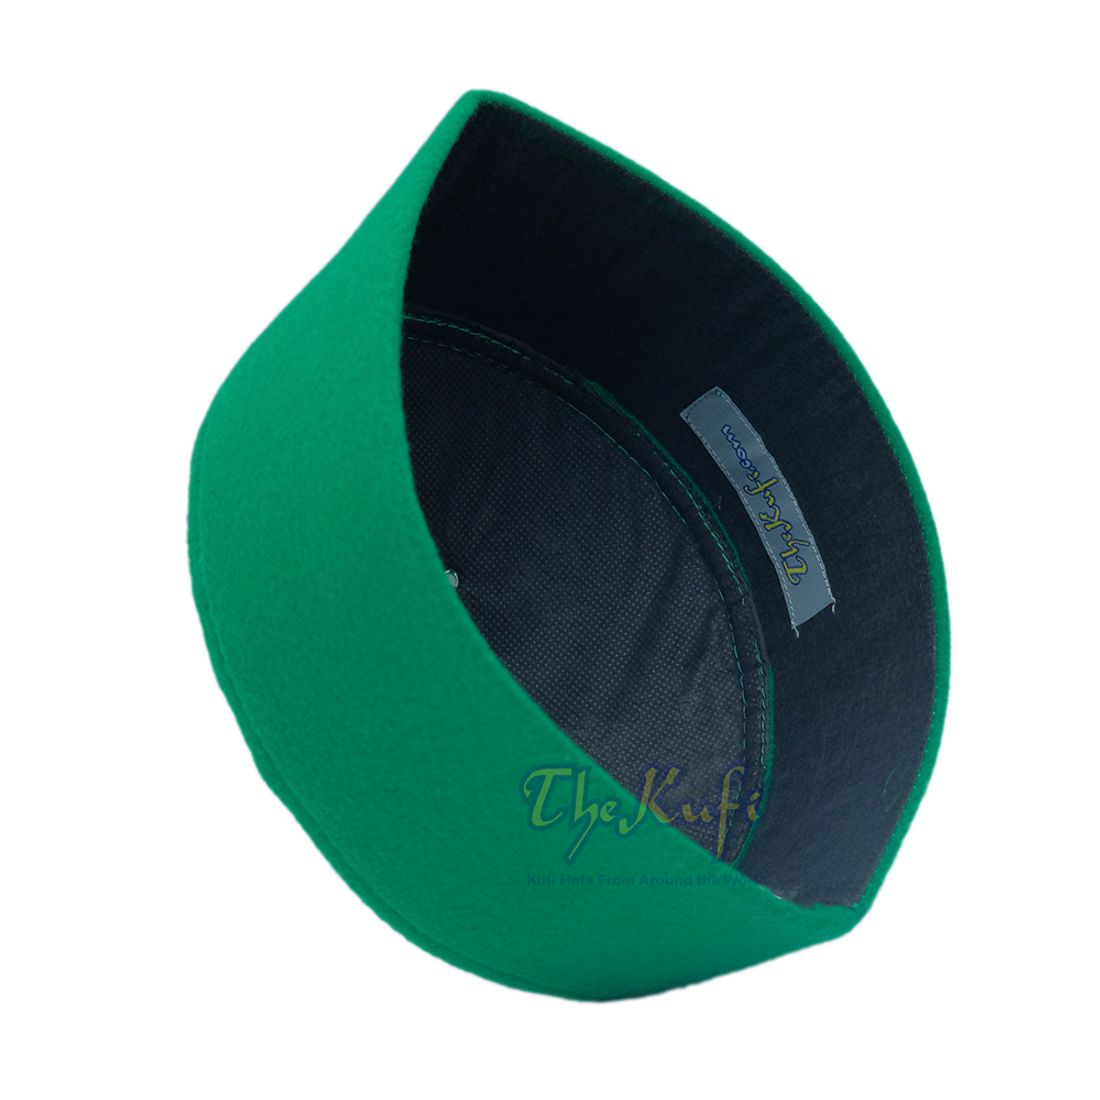 Green Handmade Vented Pointed-top Faux Felt Fez